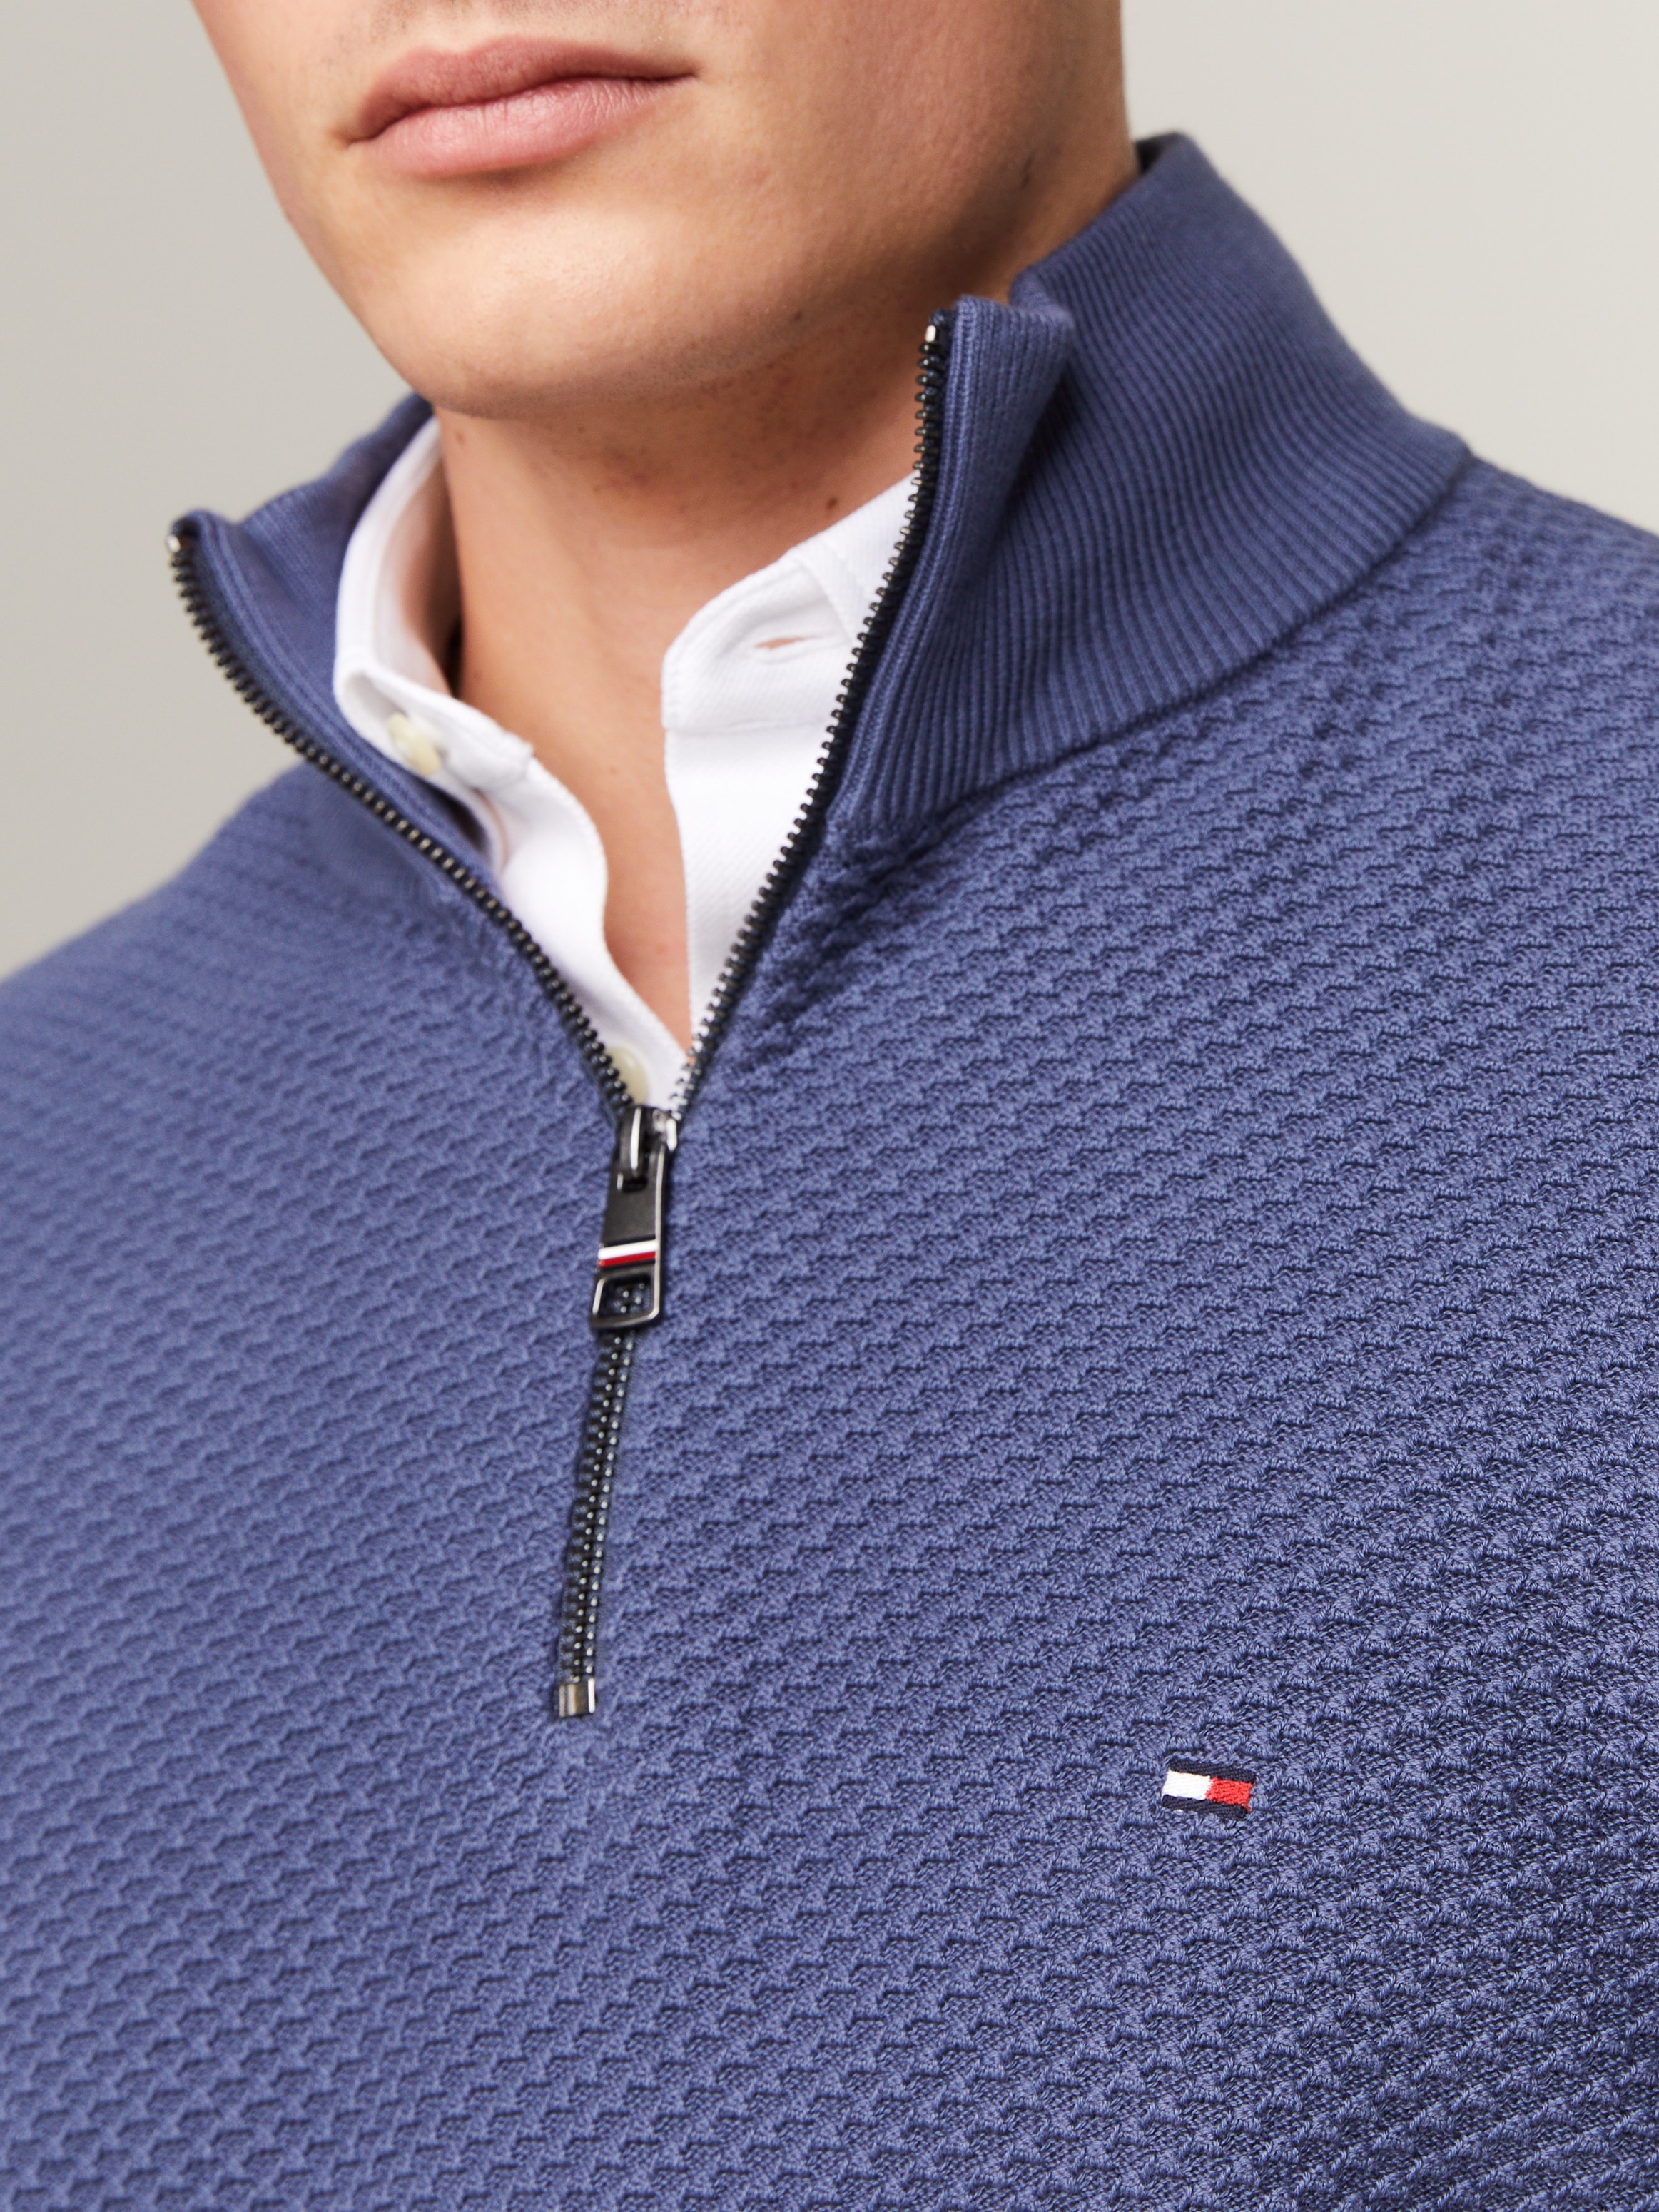 Tommy Hilfiger Troyer »OVAL STRUCTURE ZIP MOCK«